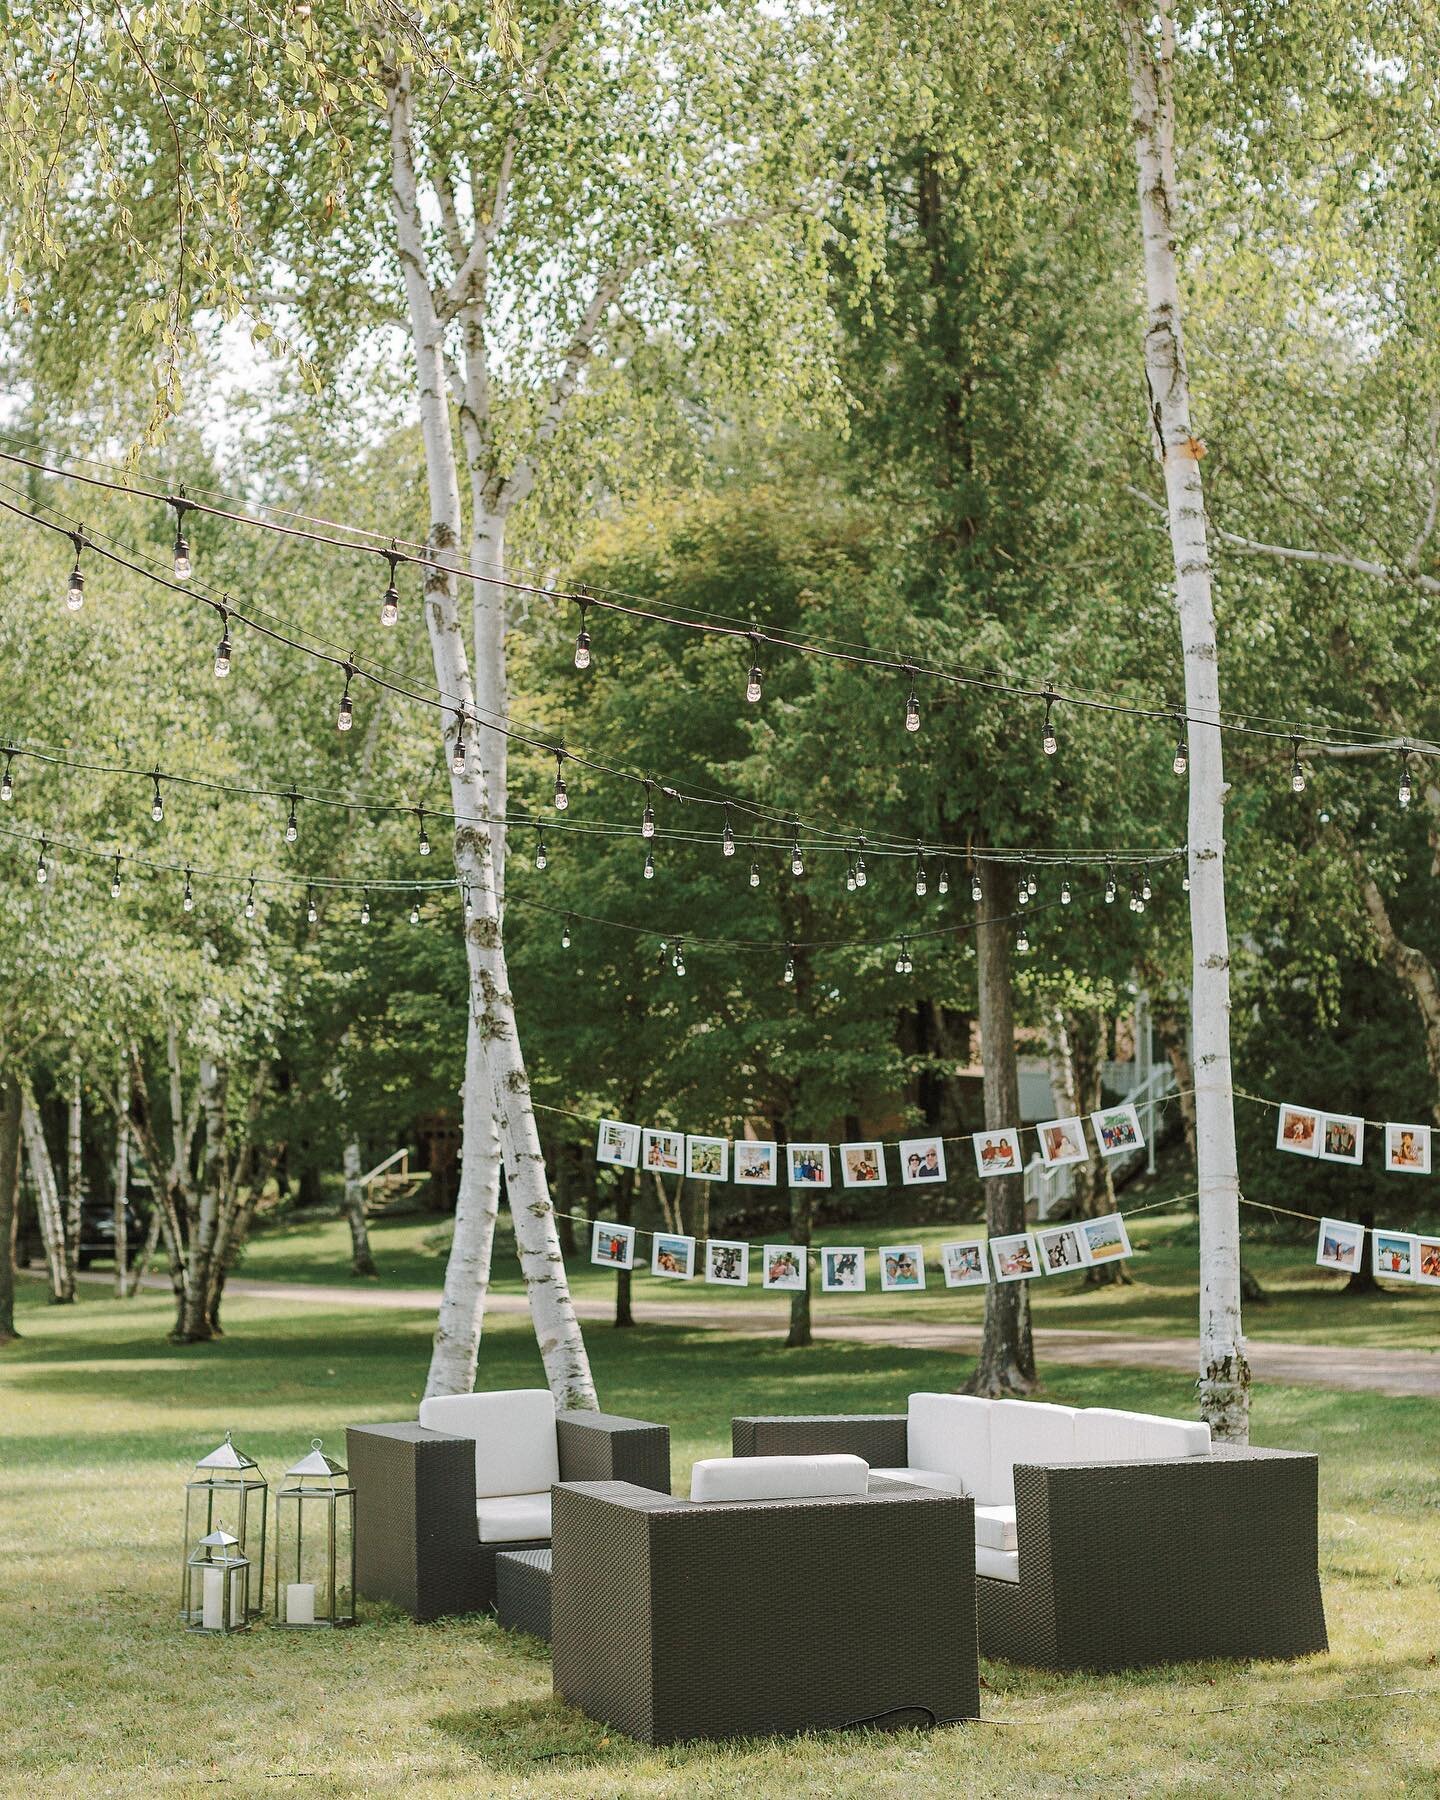 Make your day uniquely yours&hellip;

All of the personalized touches and the memories you share with your guests help to share your story and style as a couple.

We loved this photo moment strung between the birch trees. The Bride &amp; Groom printe